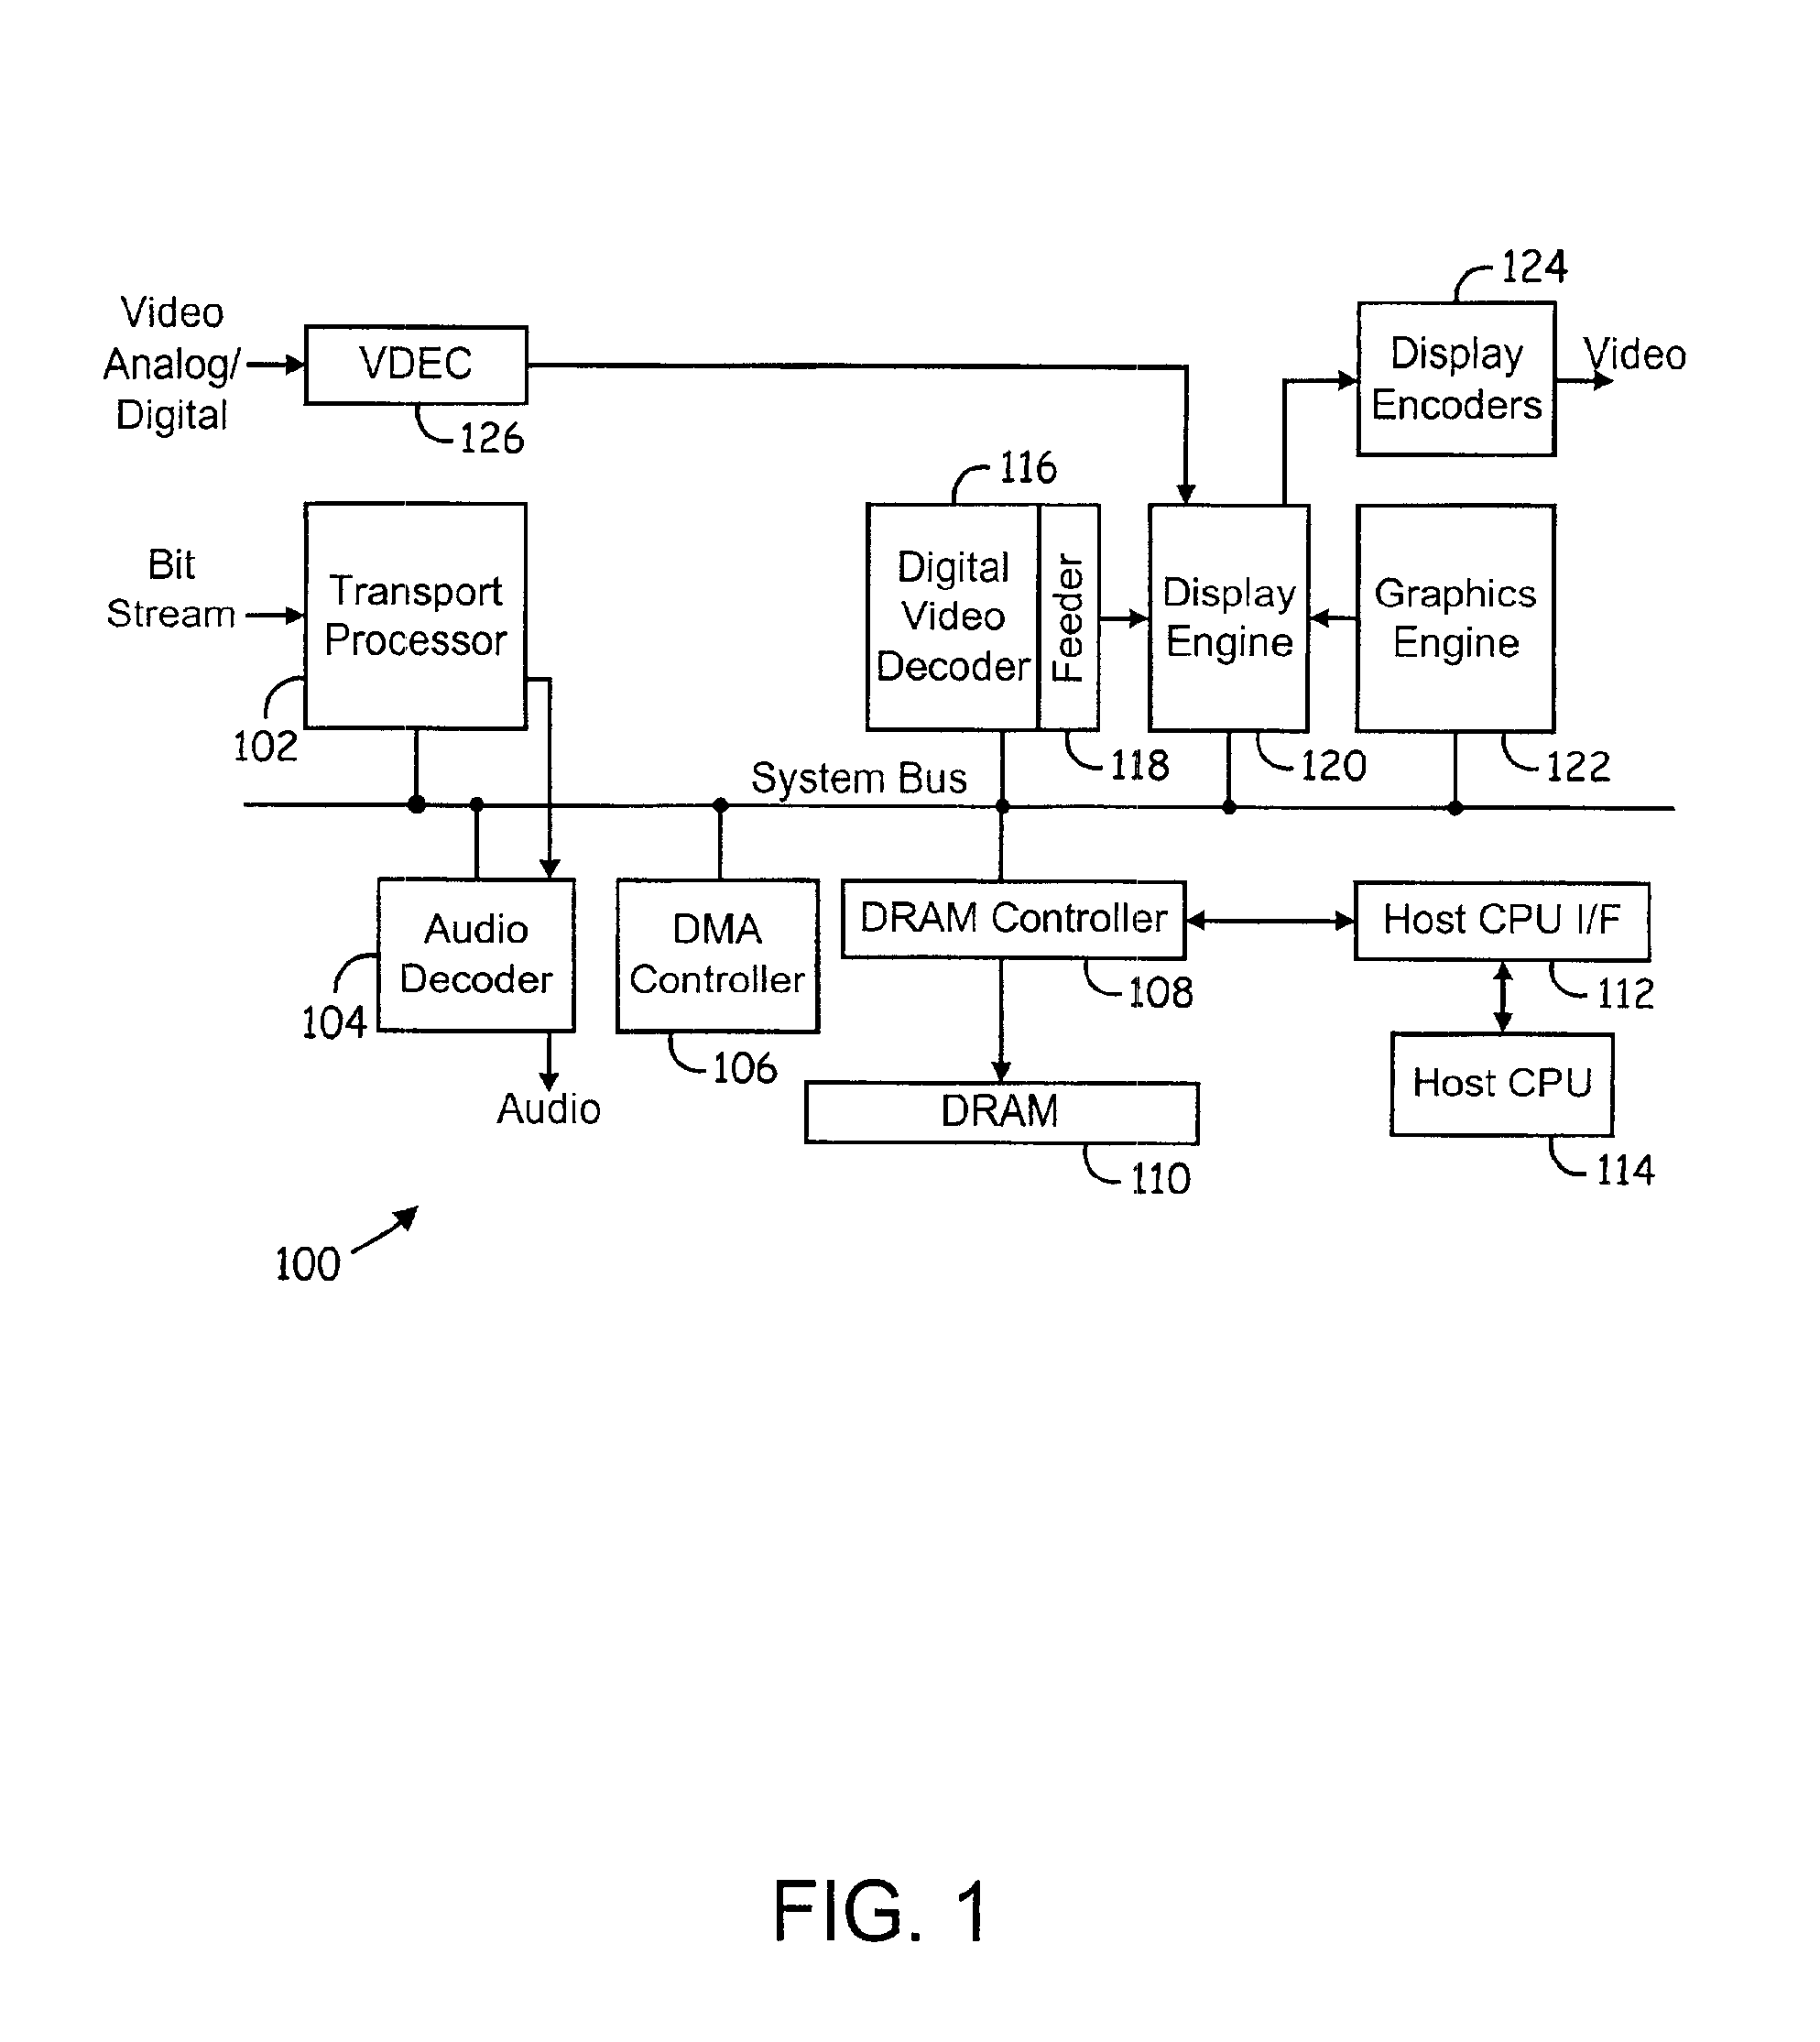 Method of communicating between modules in a decoding system